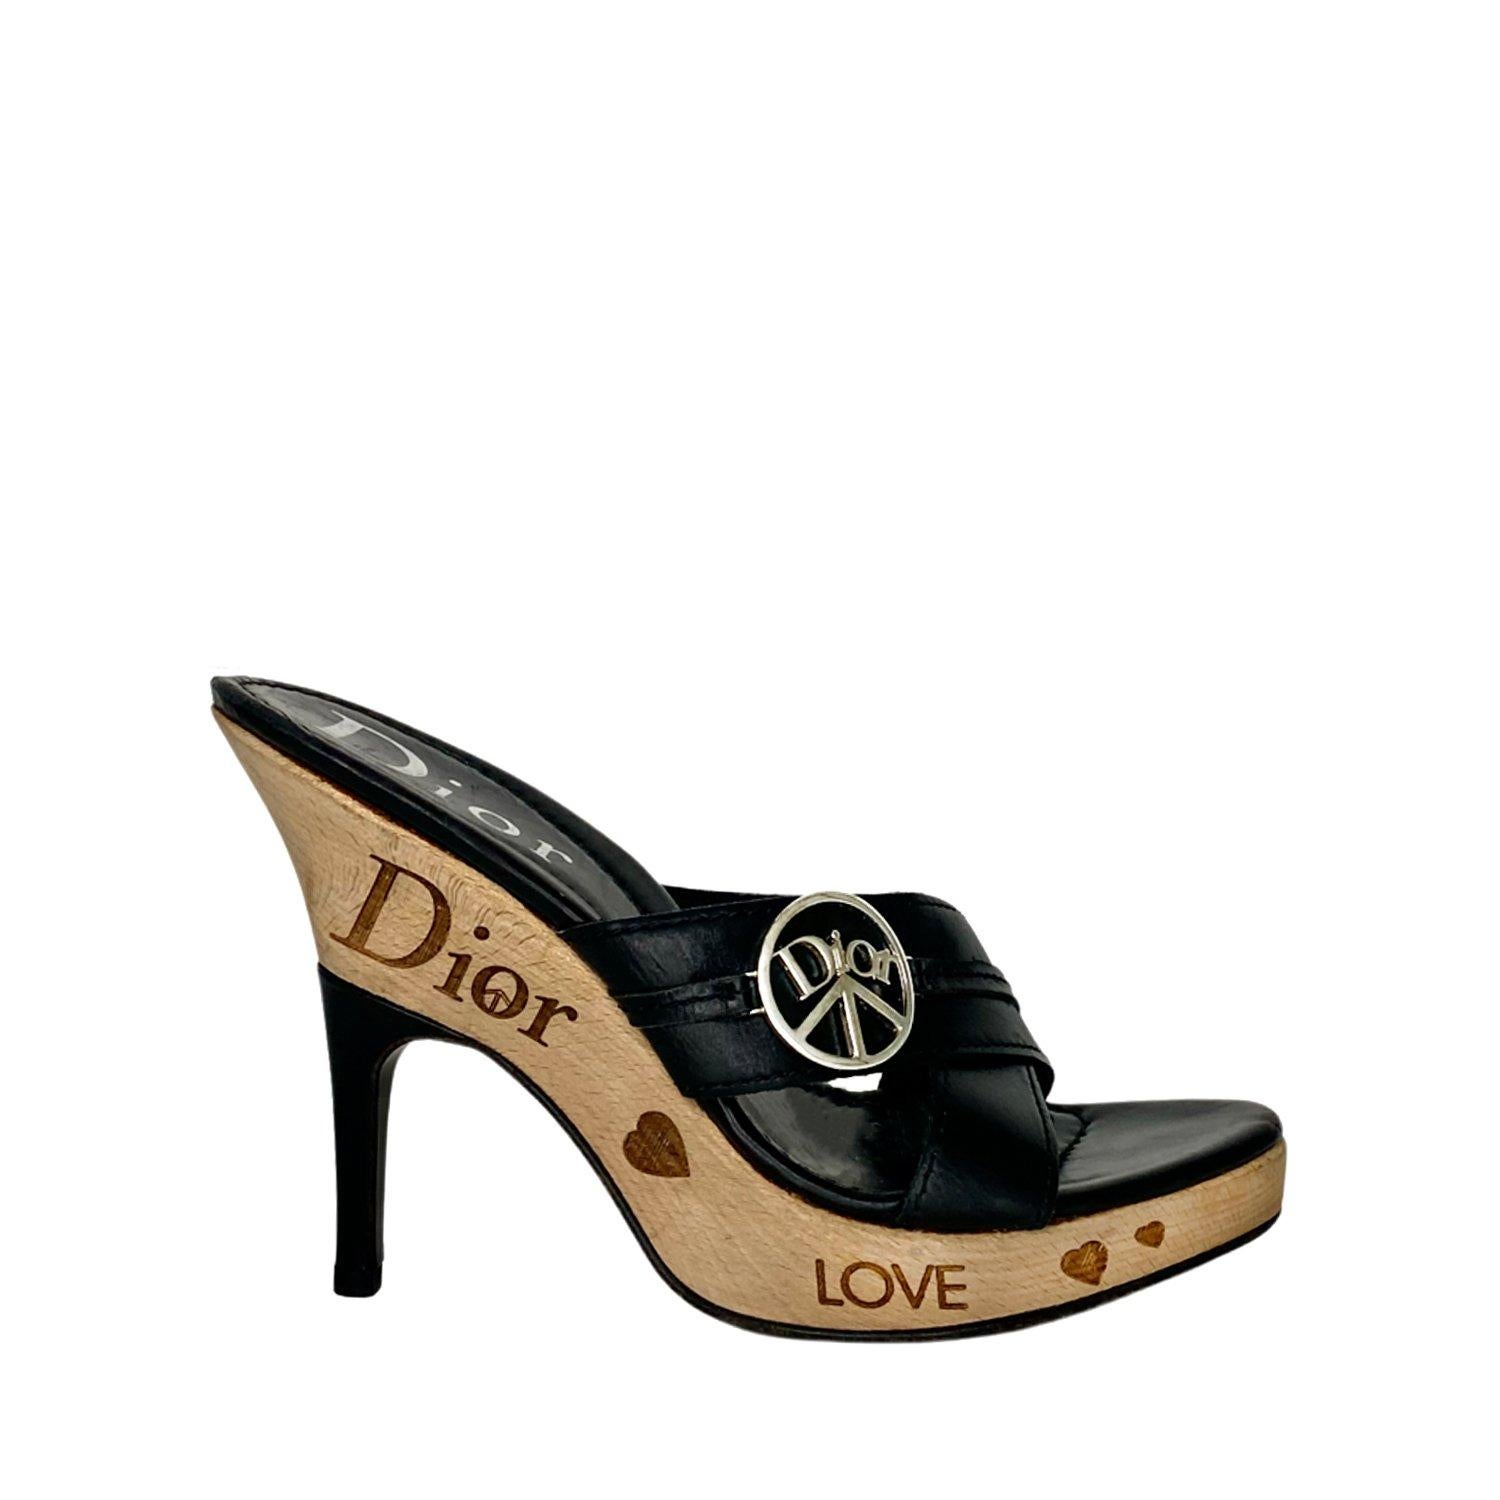 Black and brown leather and wood heel sandals for Christian Dior by John Galliano. Circa early 2000s. Featuring Dior peace embellishments in silver metal to the front, Dior signature logo to the footbed and heart, peace, love and Dior signs imbedded